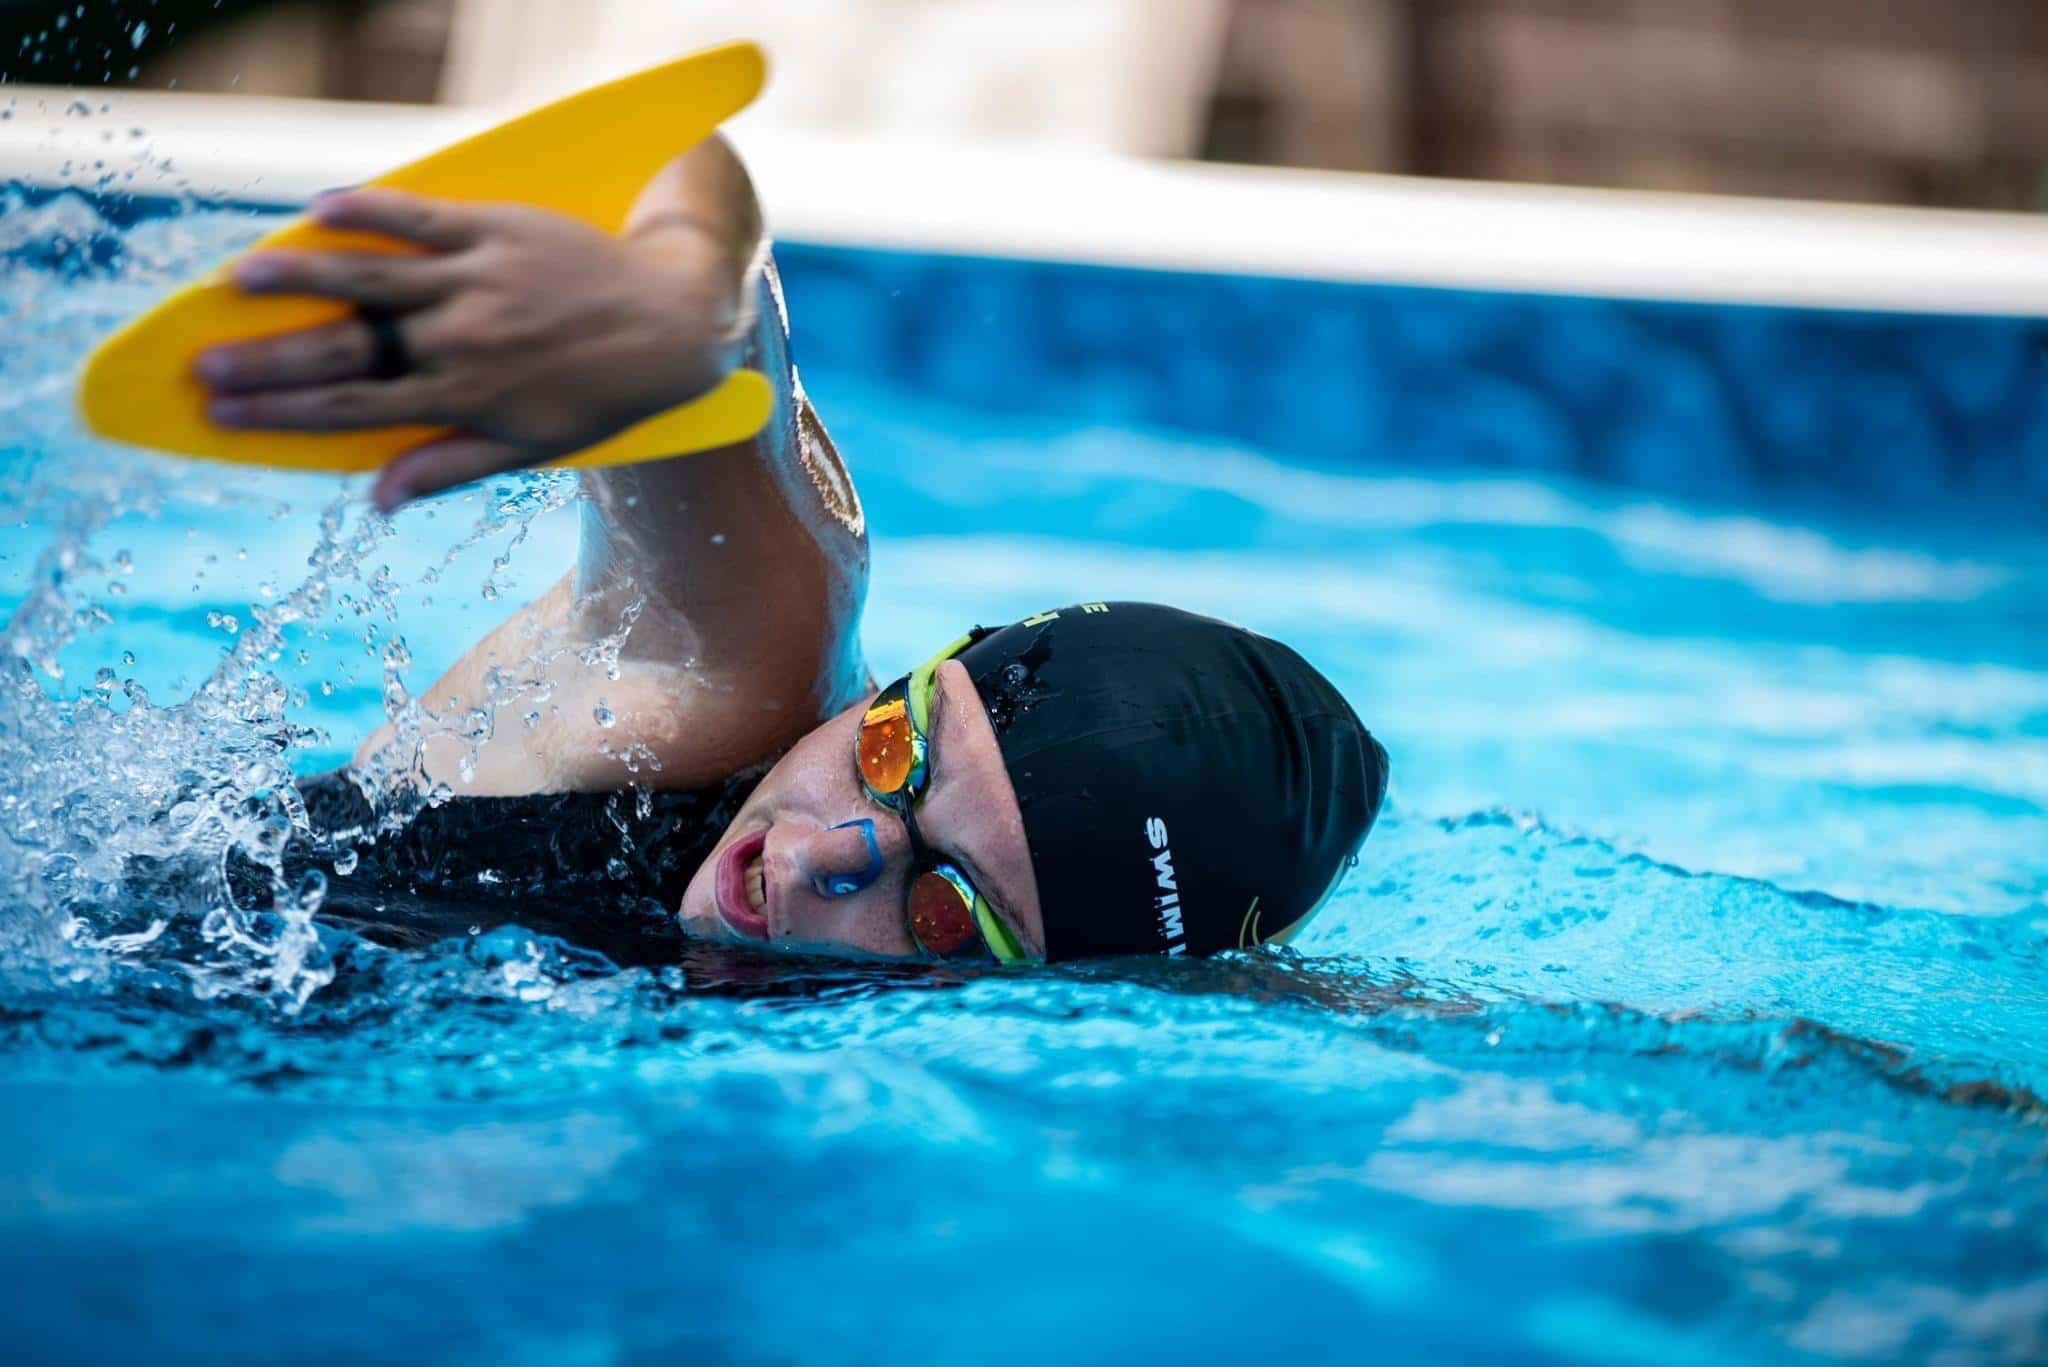 Swimmer inhaling while breathing during swimming.